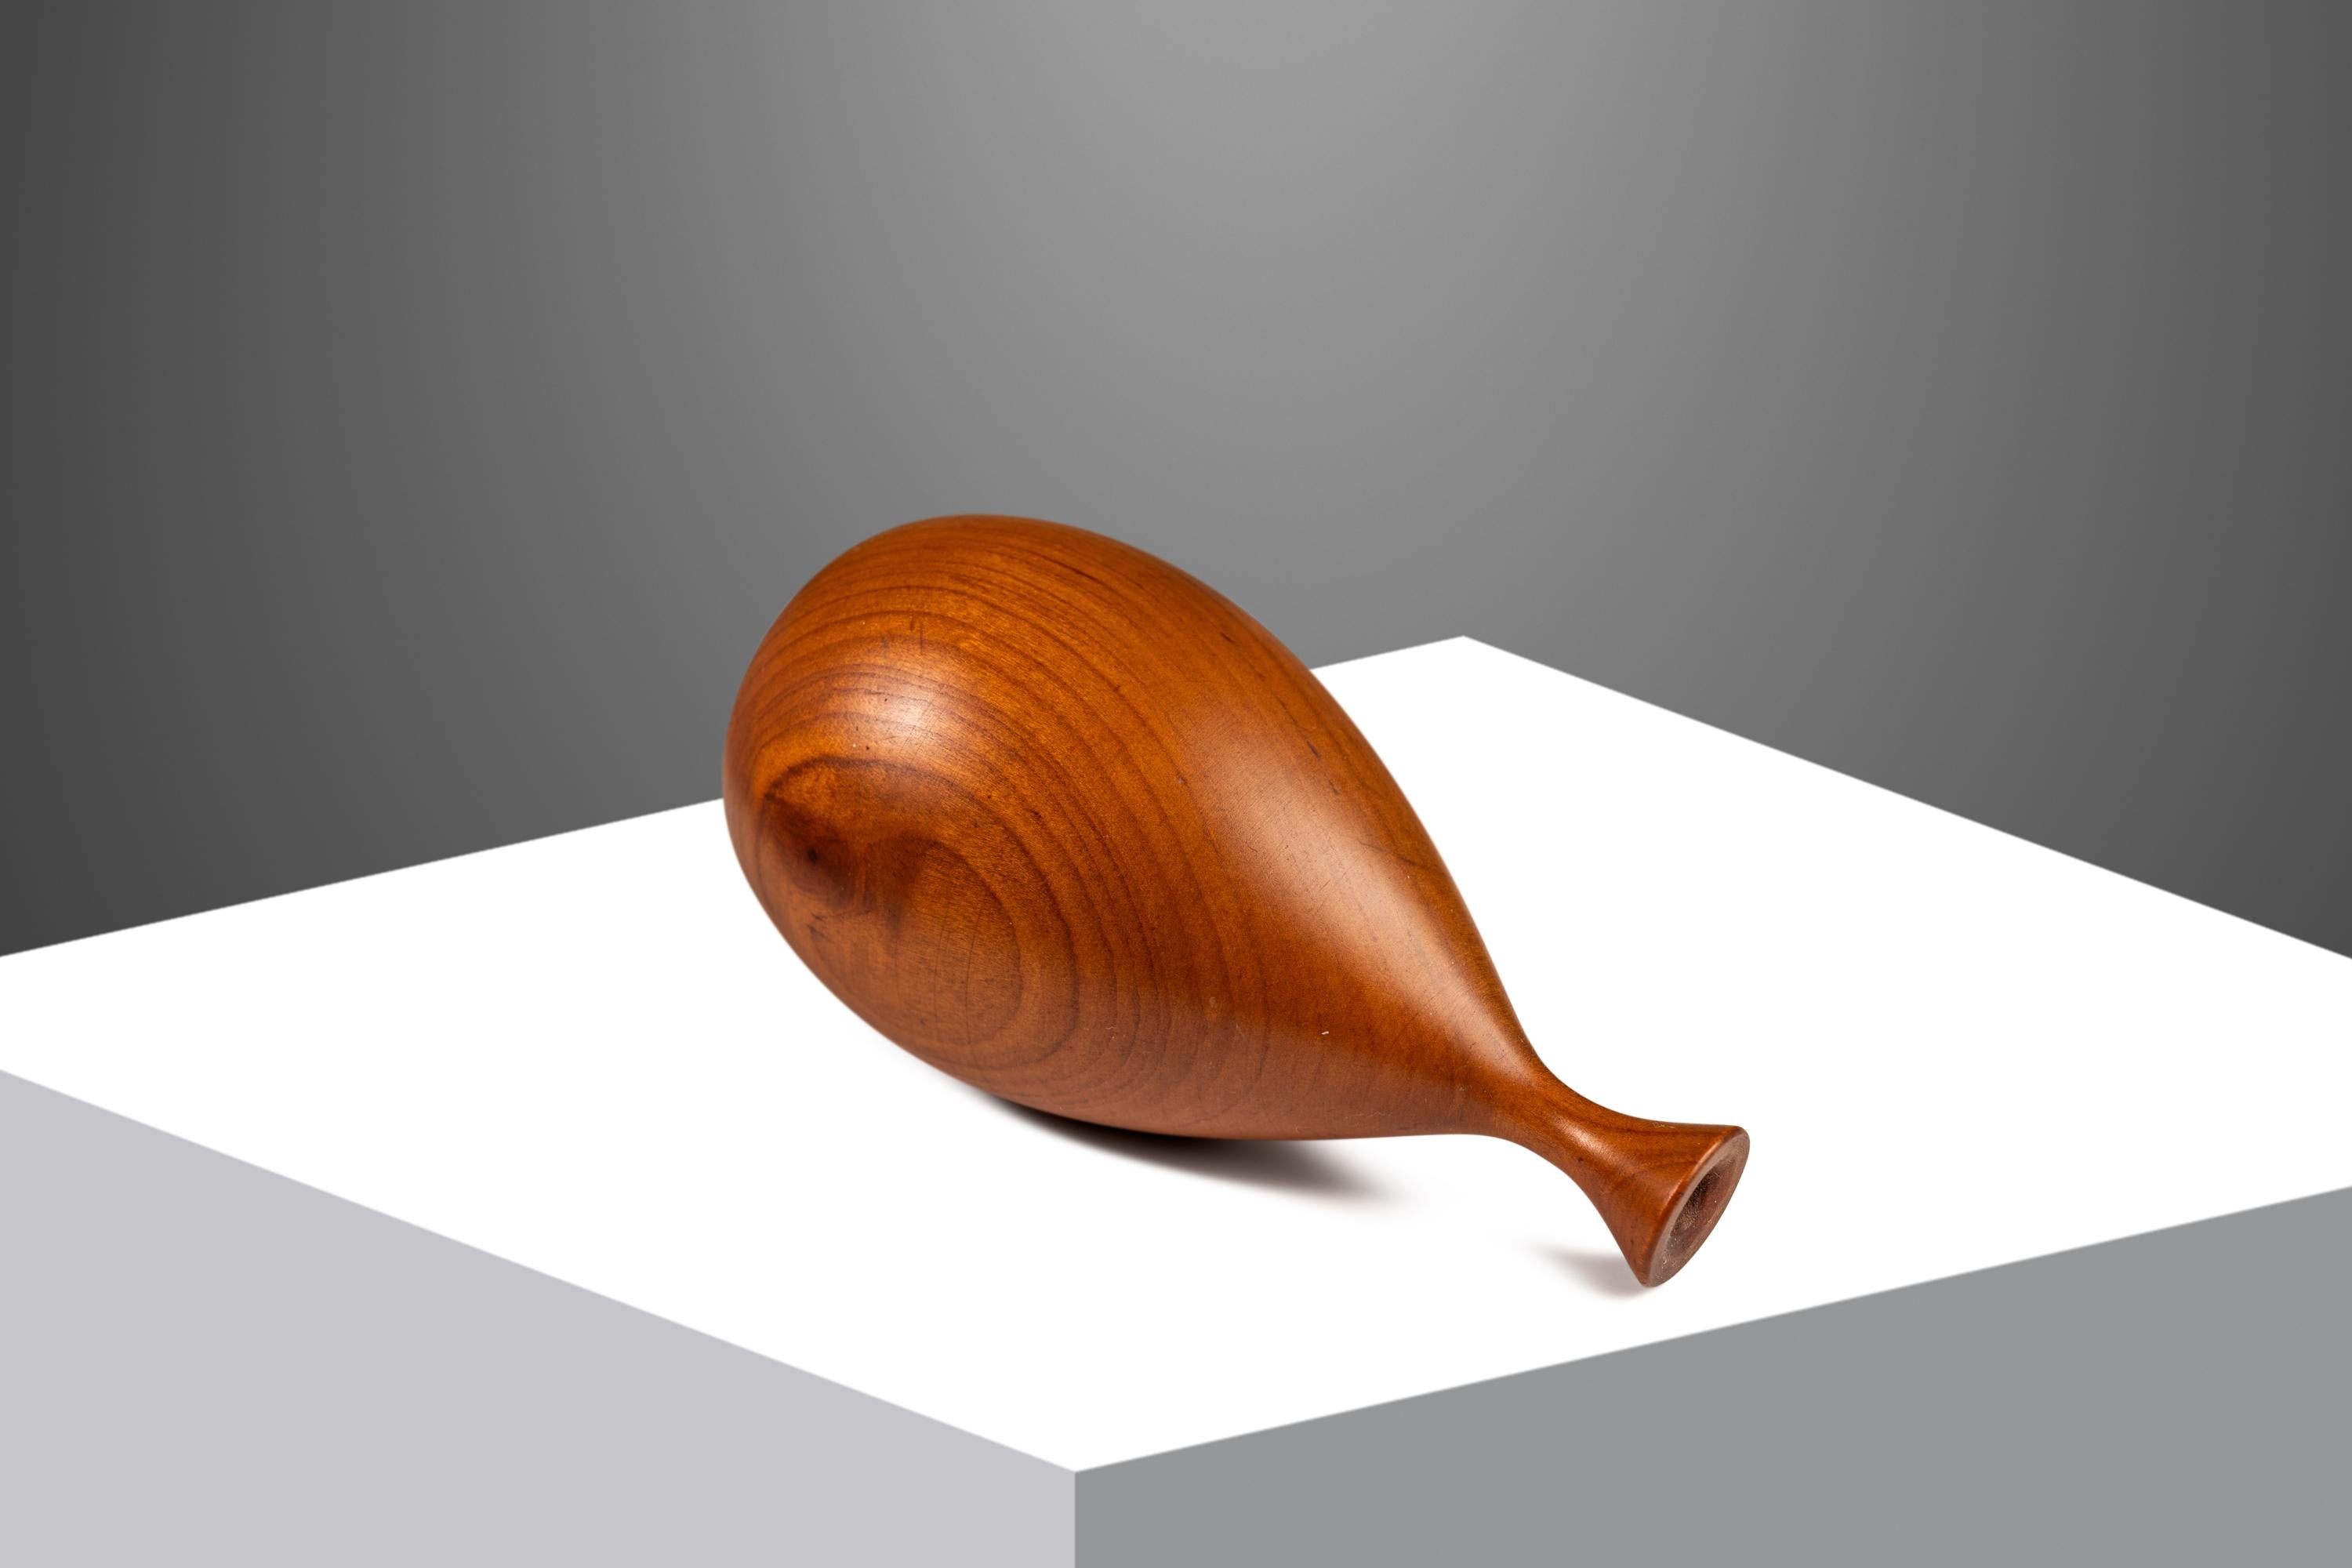 American Signed Petite Wood-Turned Vase in solid Walnut by George Biersdorf, USA, c. 1979 For Sale